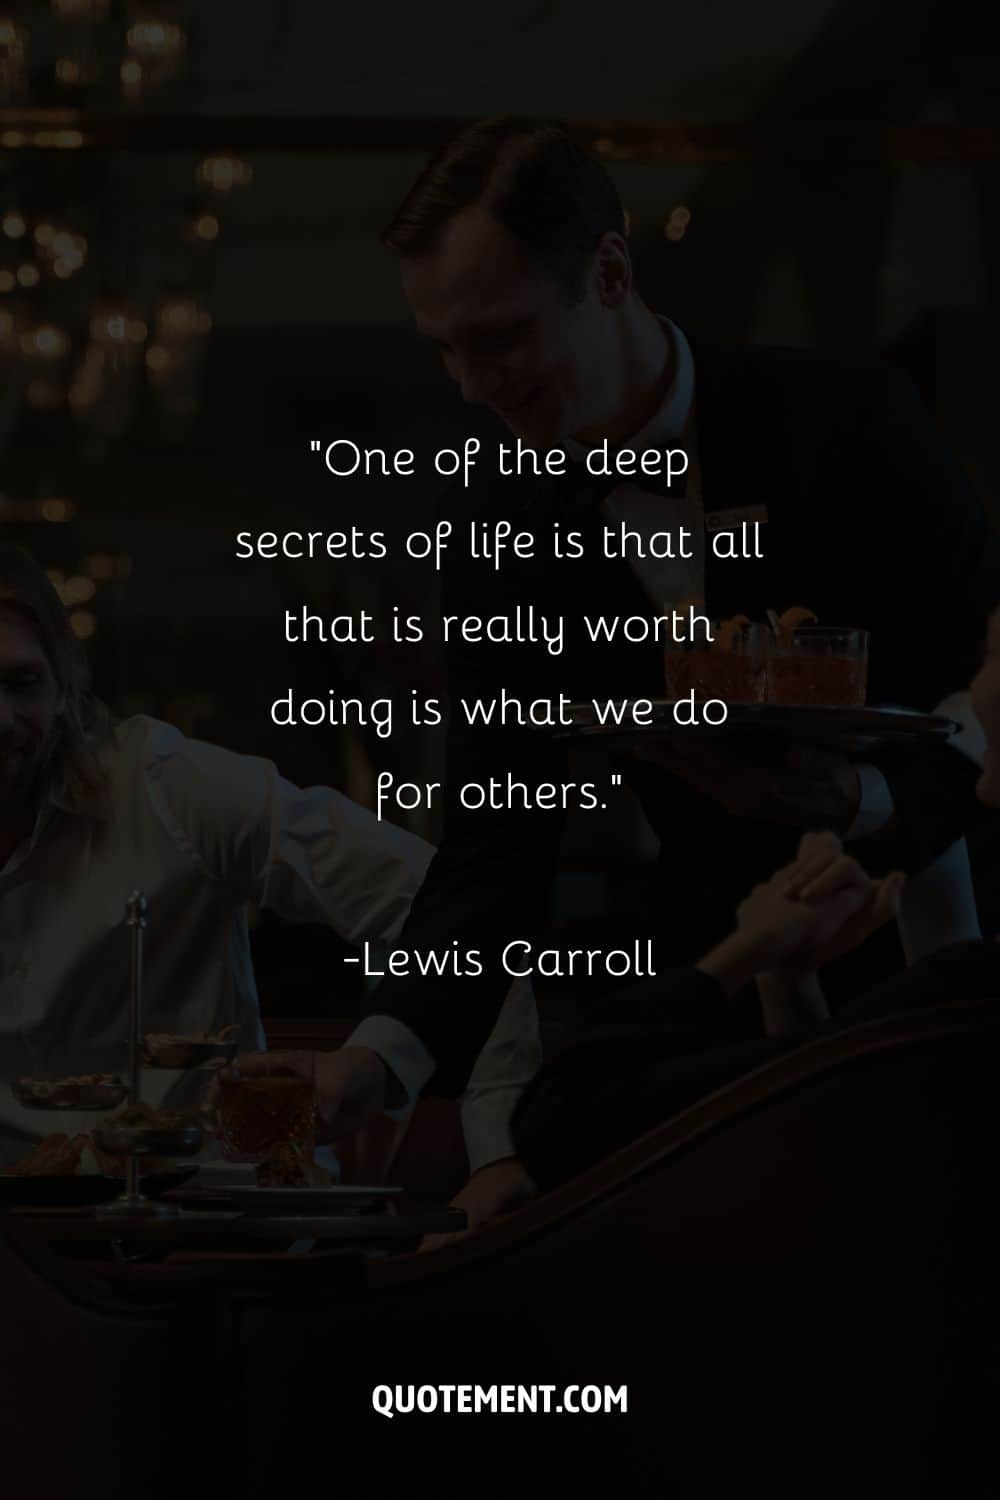 Image of a waiter serving drinks representing a quote on service